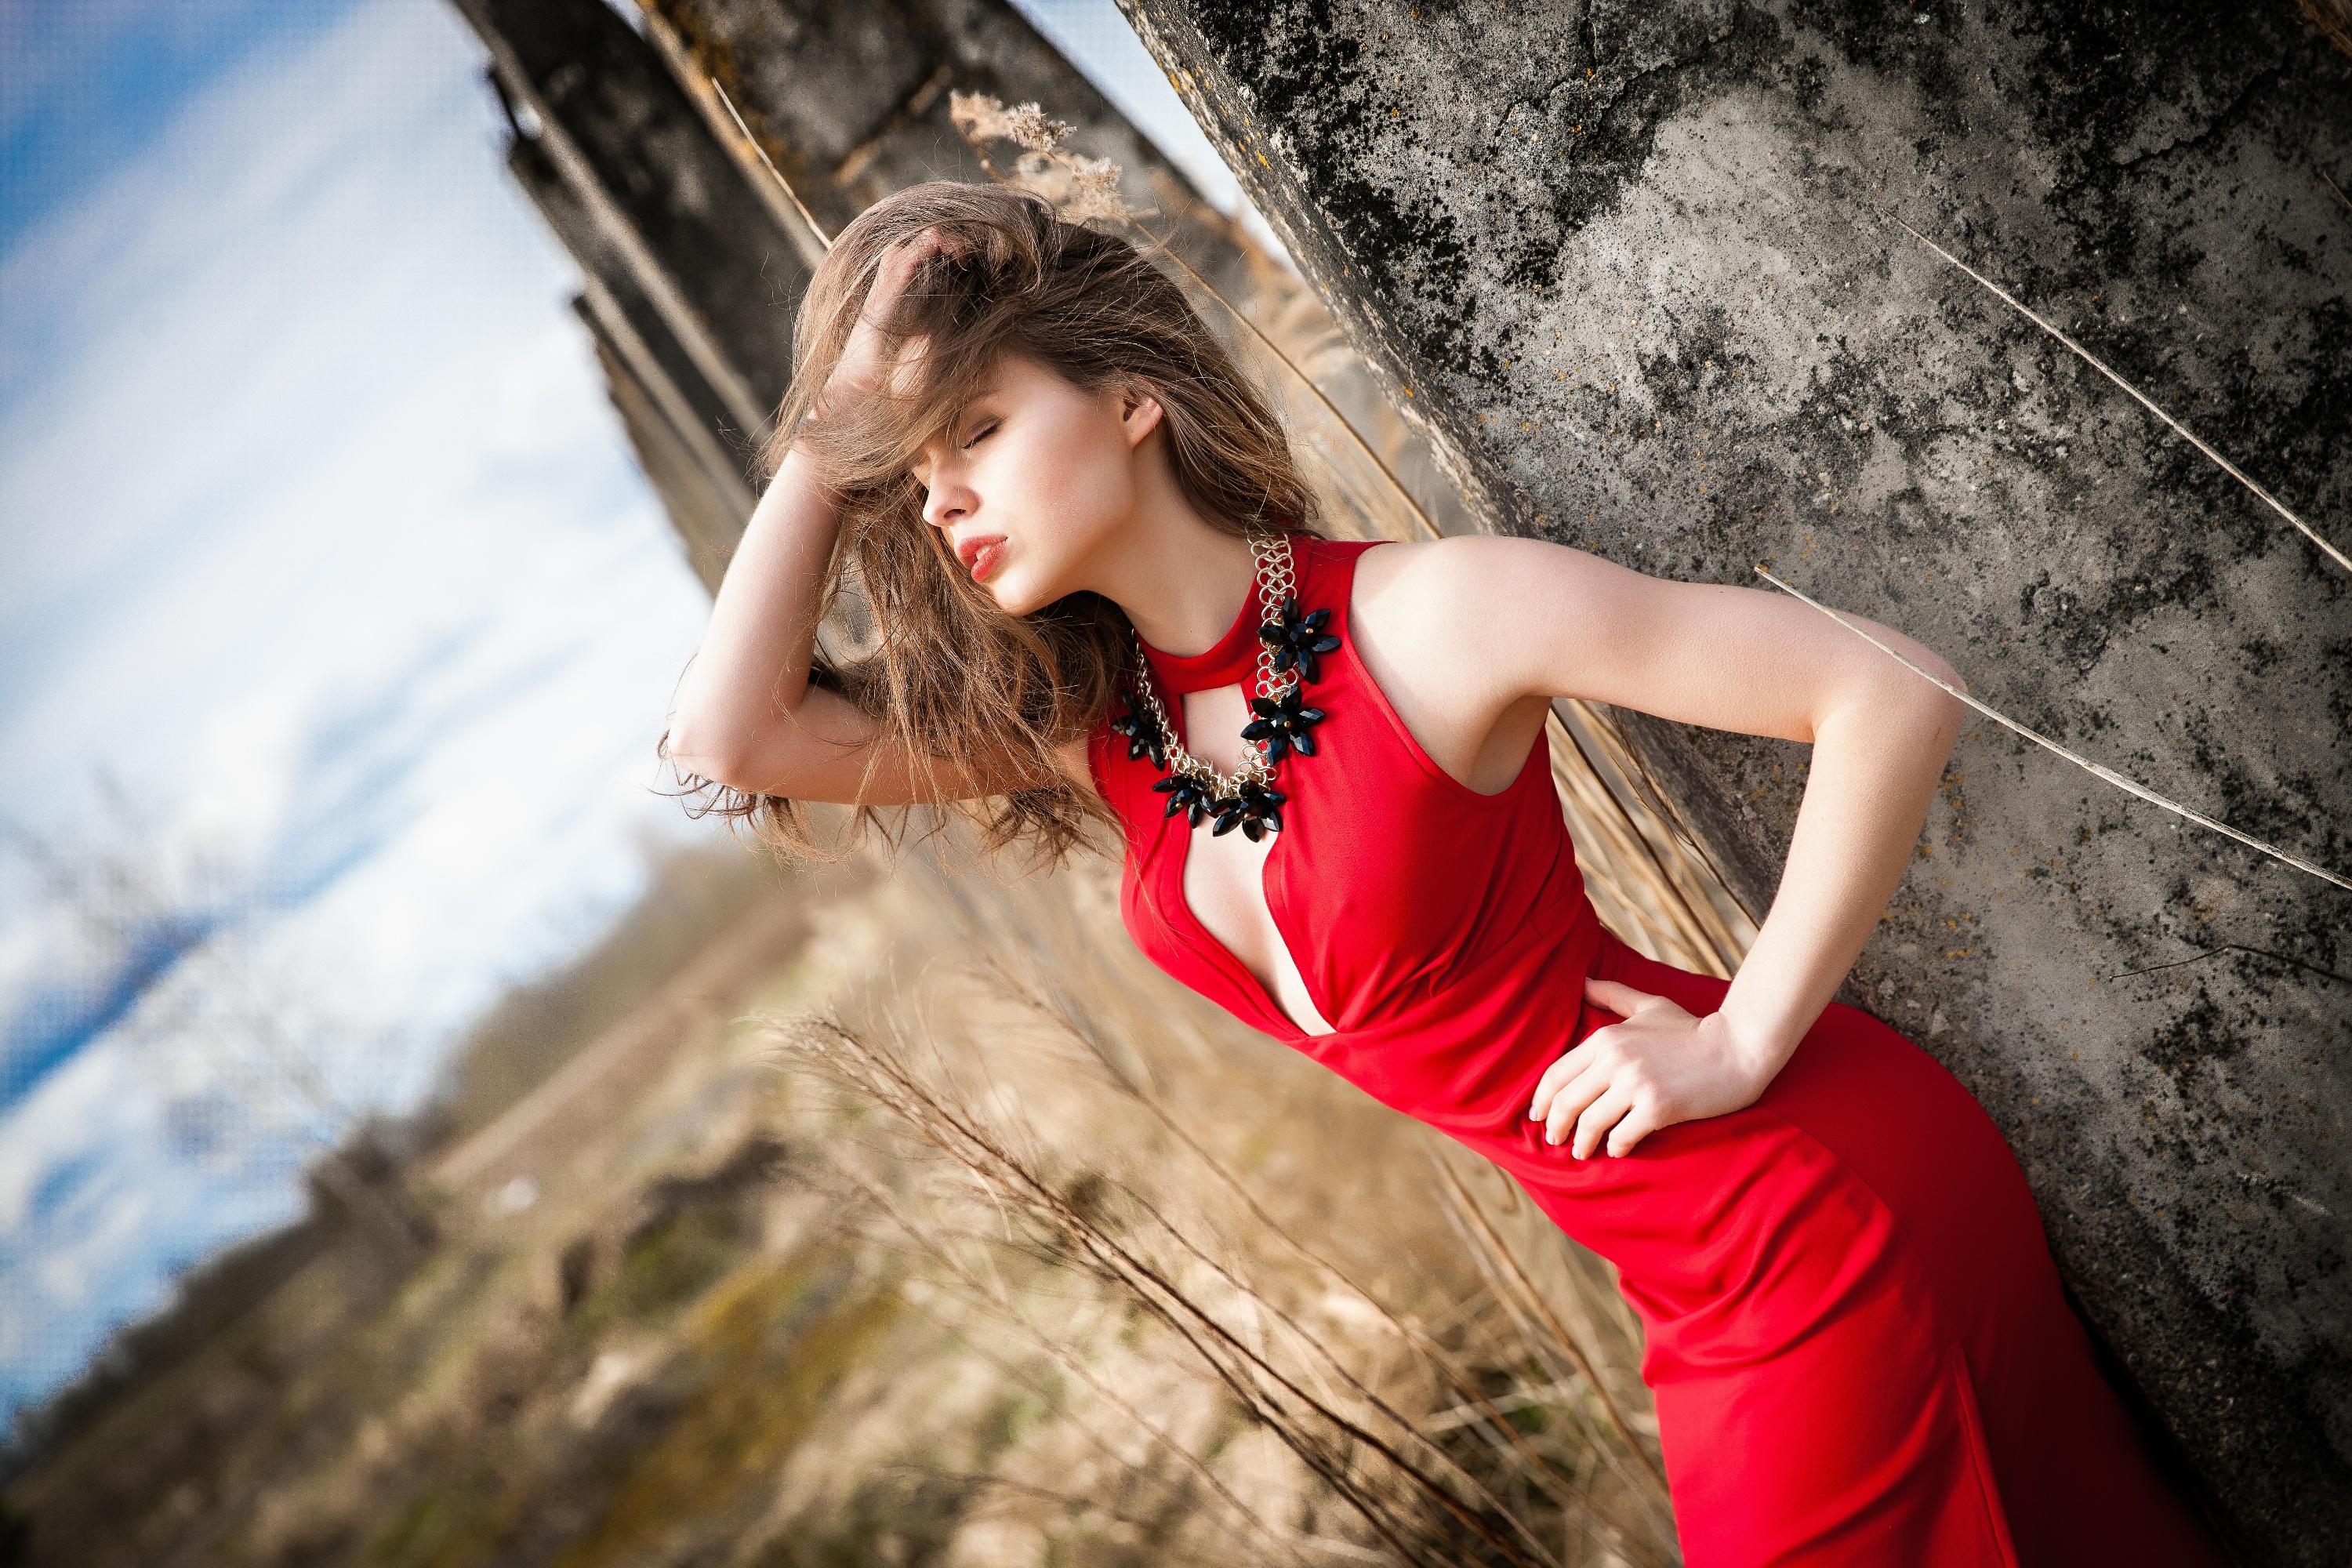 Model Red Lipstick Red Dress Closed Eyes Necklace Hands On Waist Hands In Hair Women Outdoors 3000x2000